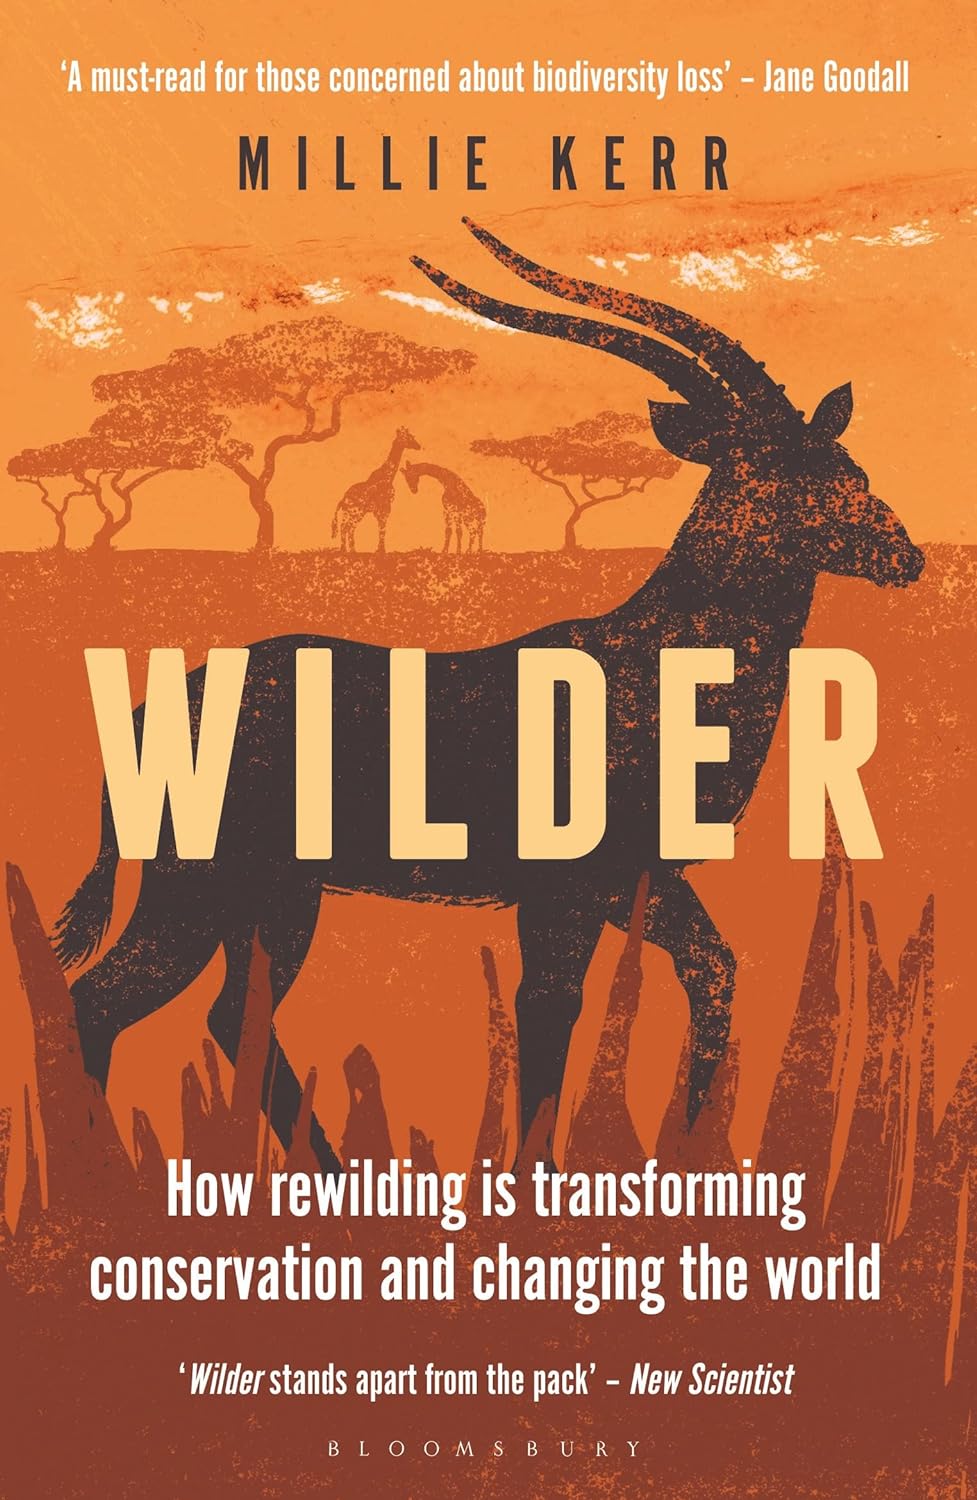 how rewilding is transformation conservation